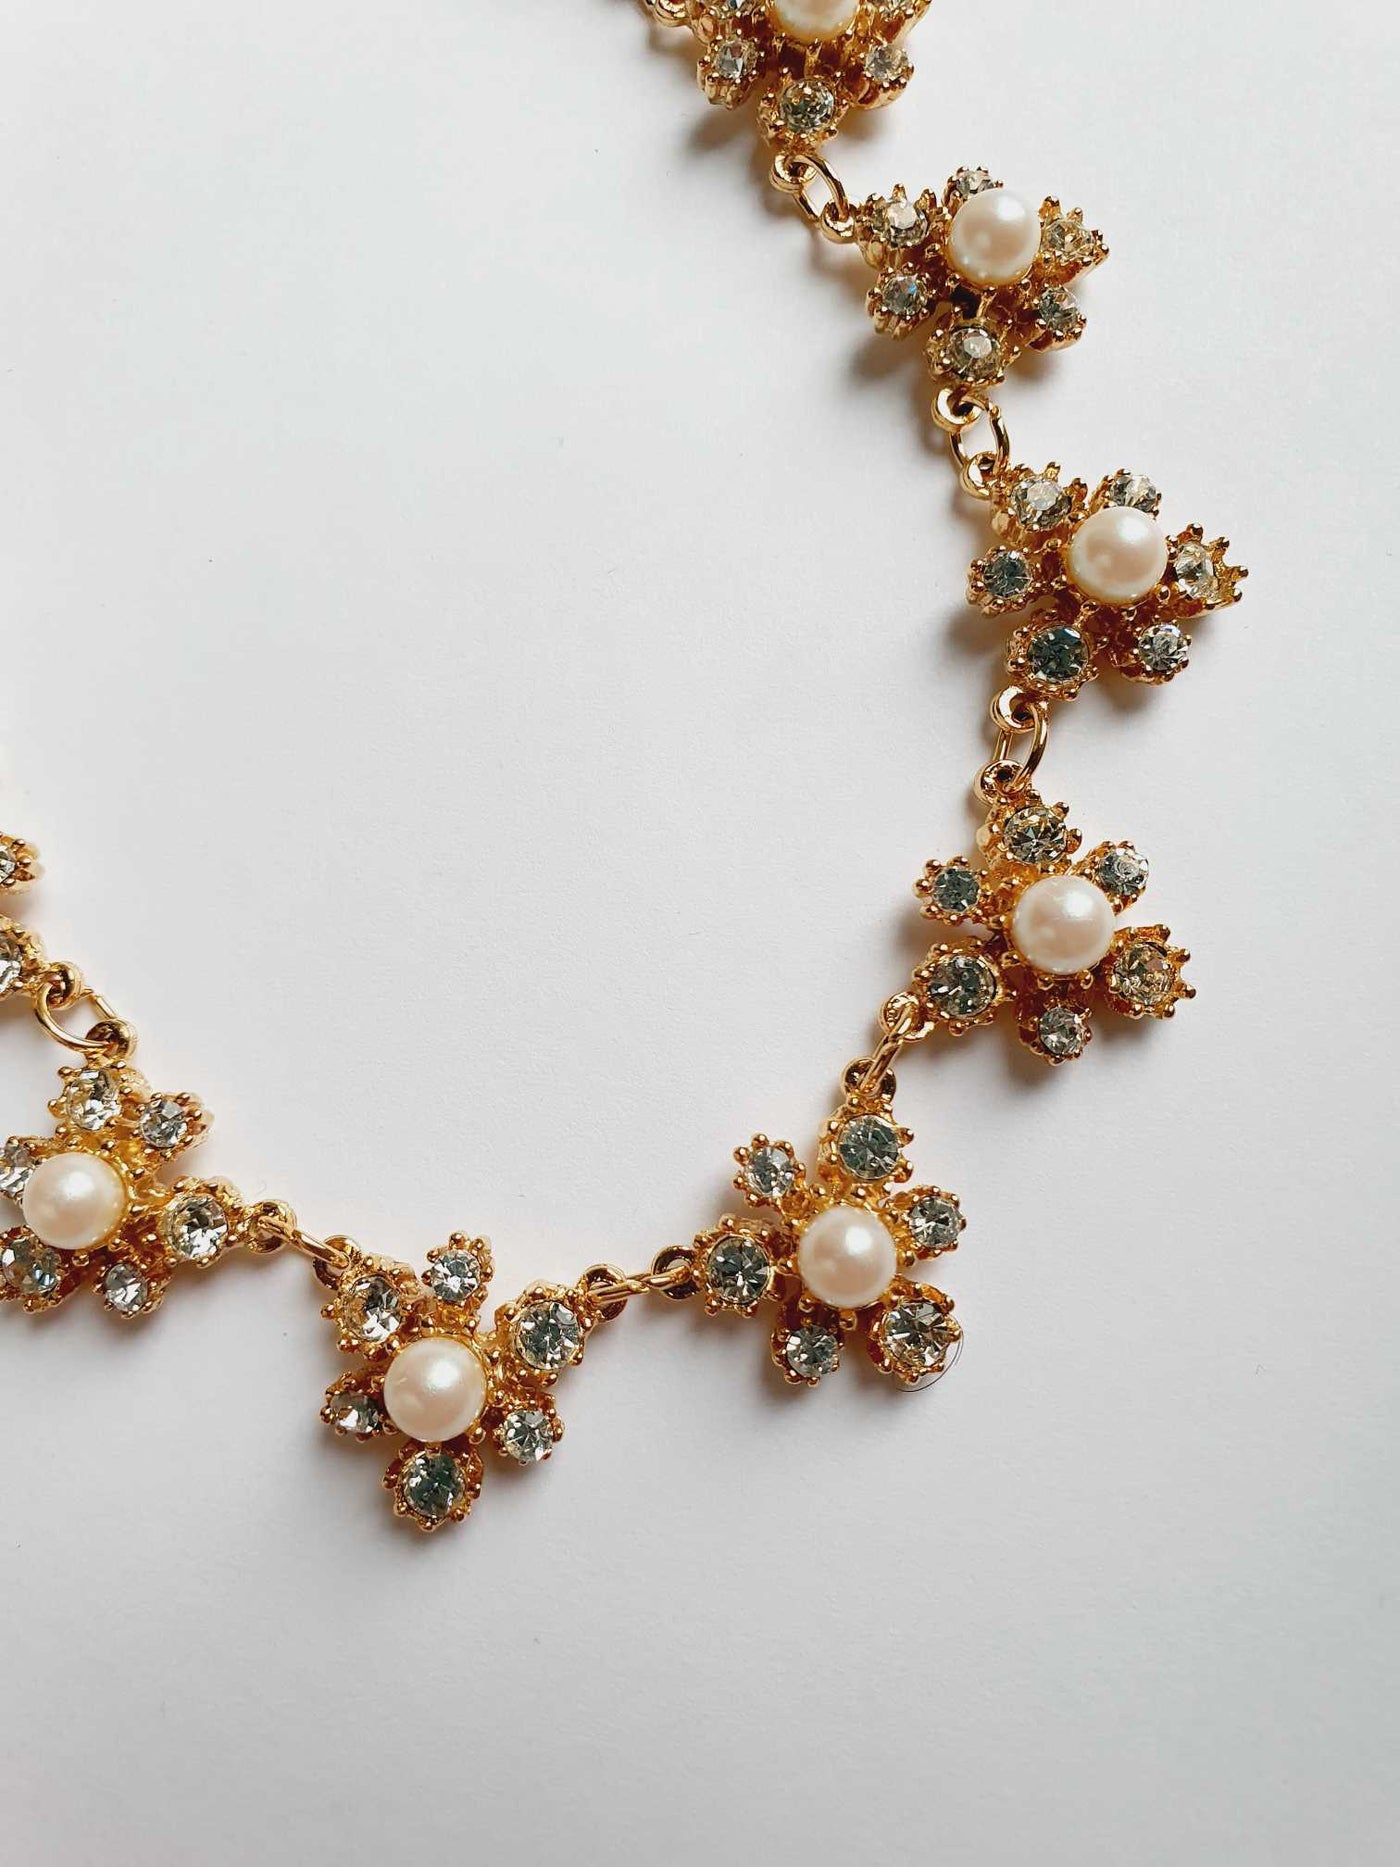 Vintage Gold Plated Statement Pearls & Crystals Necklace